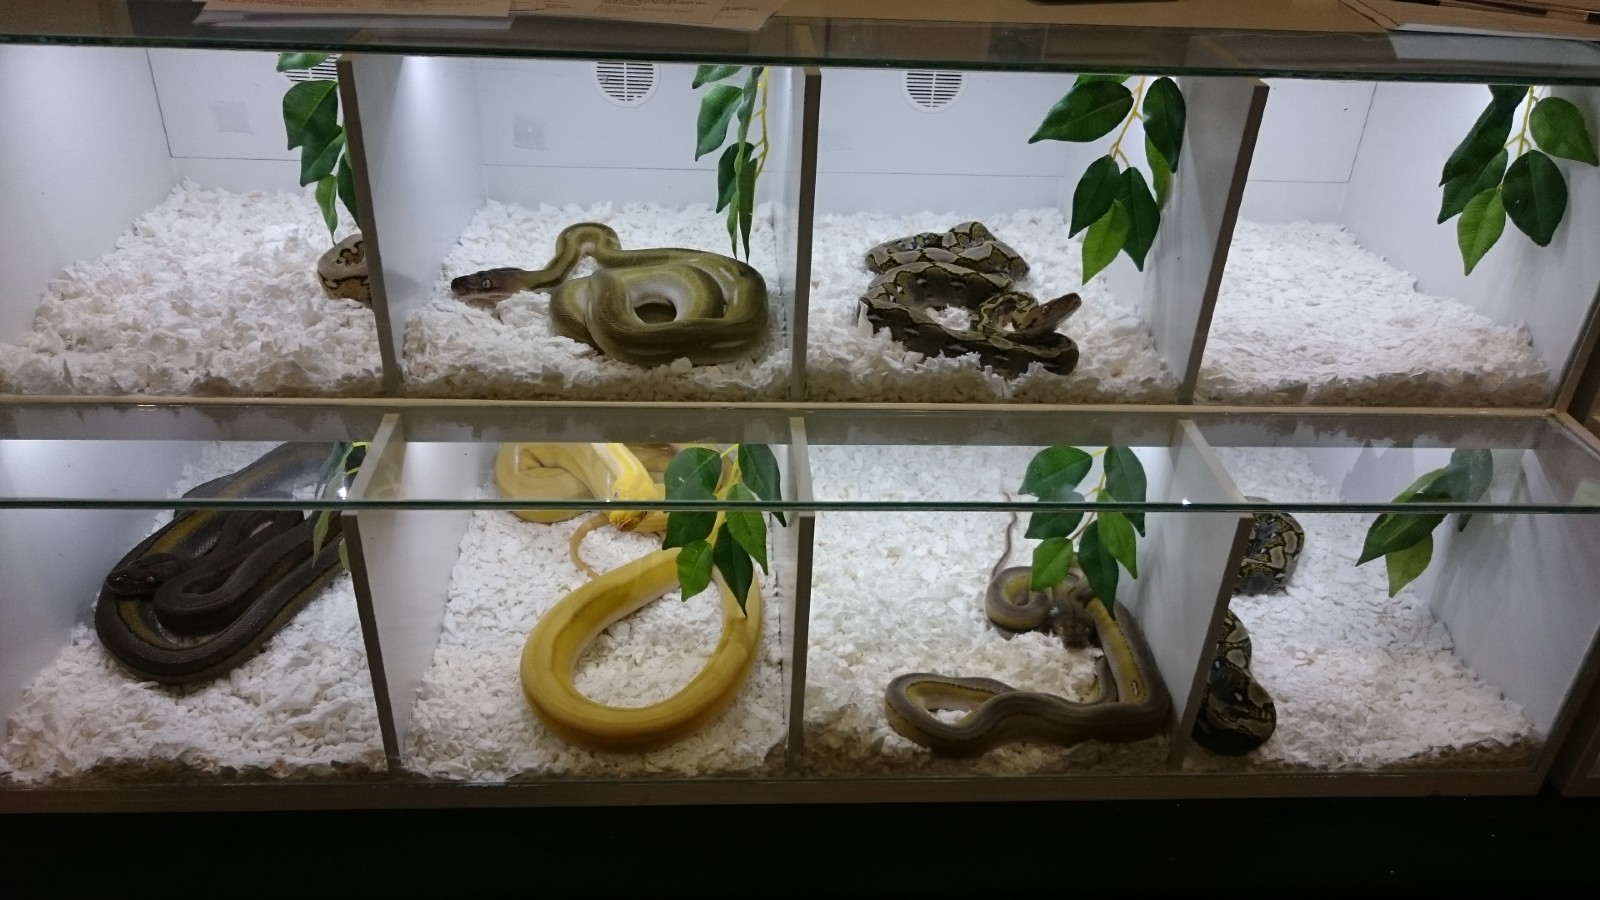 Eight small perspex boxes stacked, and containing snakes for sale at the reptile market.